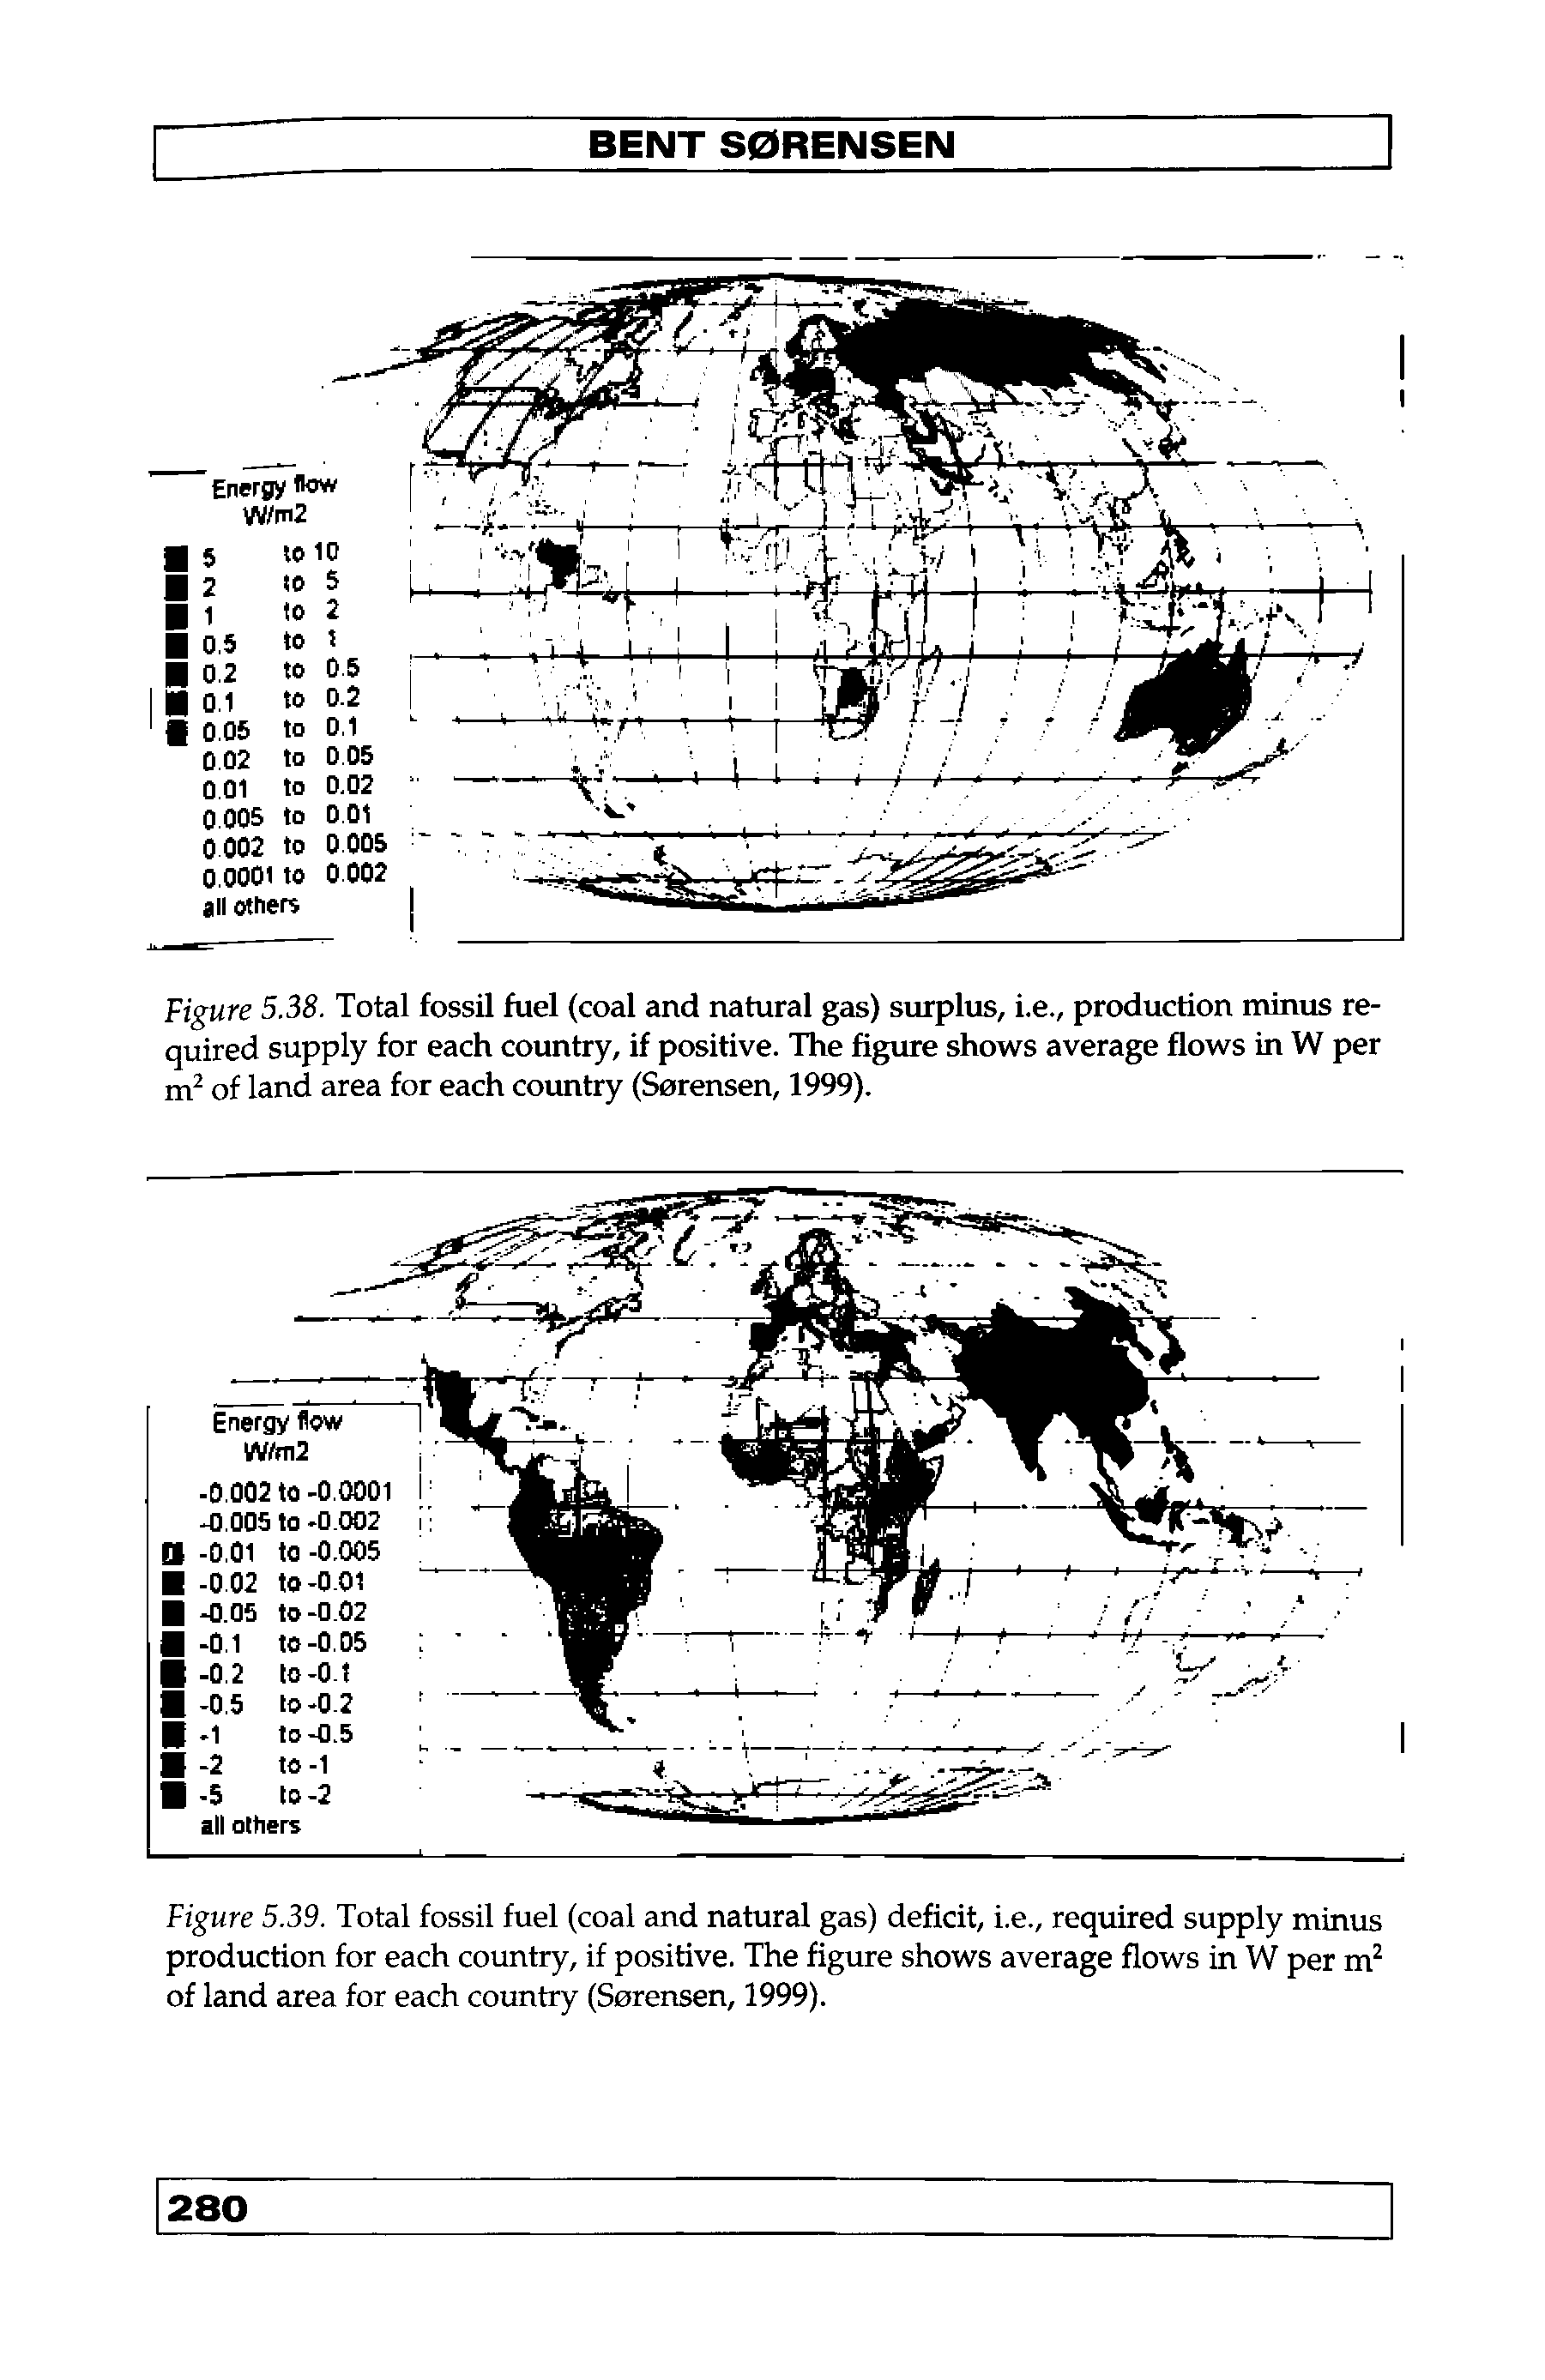 Figure 5.38. Total fossil fuel (coal and natural gas) surplus, i.e., production minus required supply for each country, if positive. The figure shows average flows in W per of land area for each country (Sorensen, 1999).